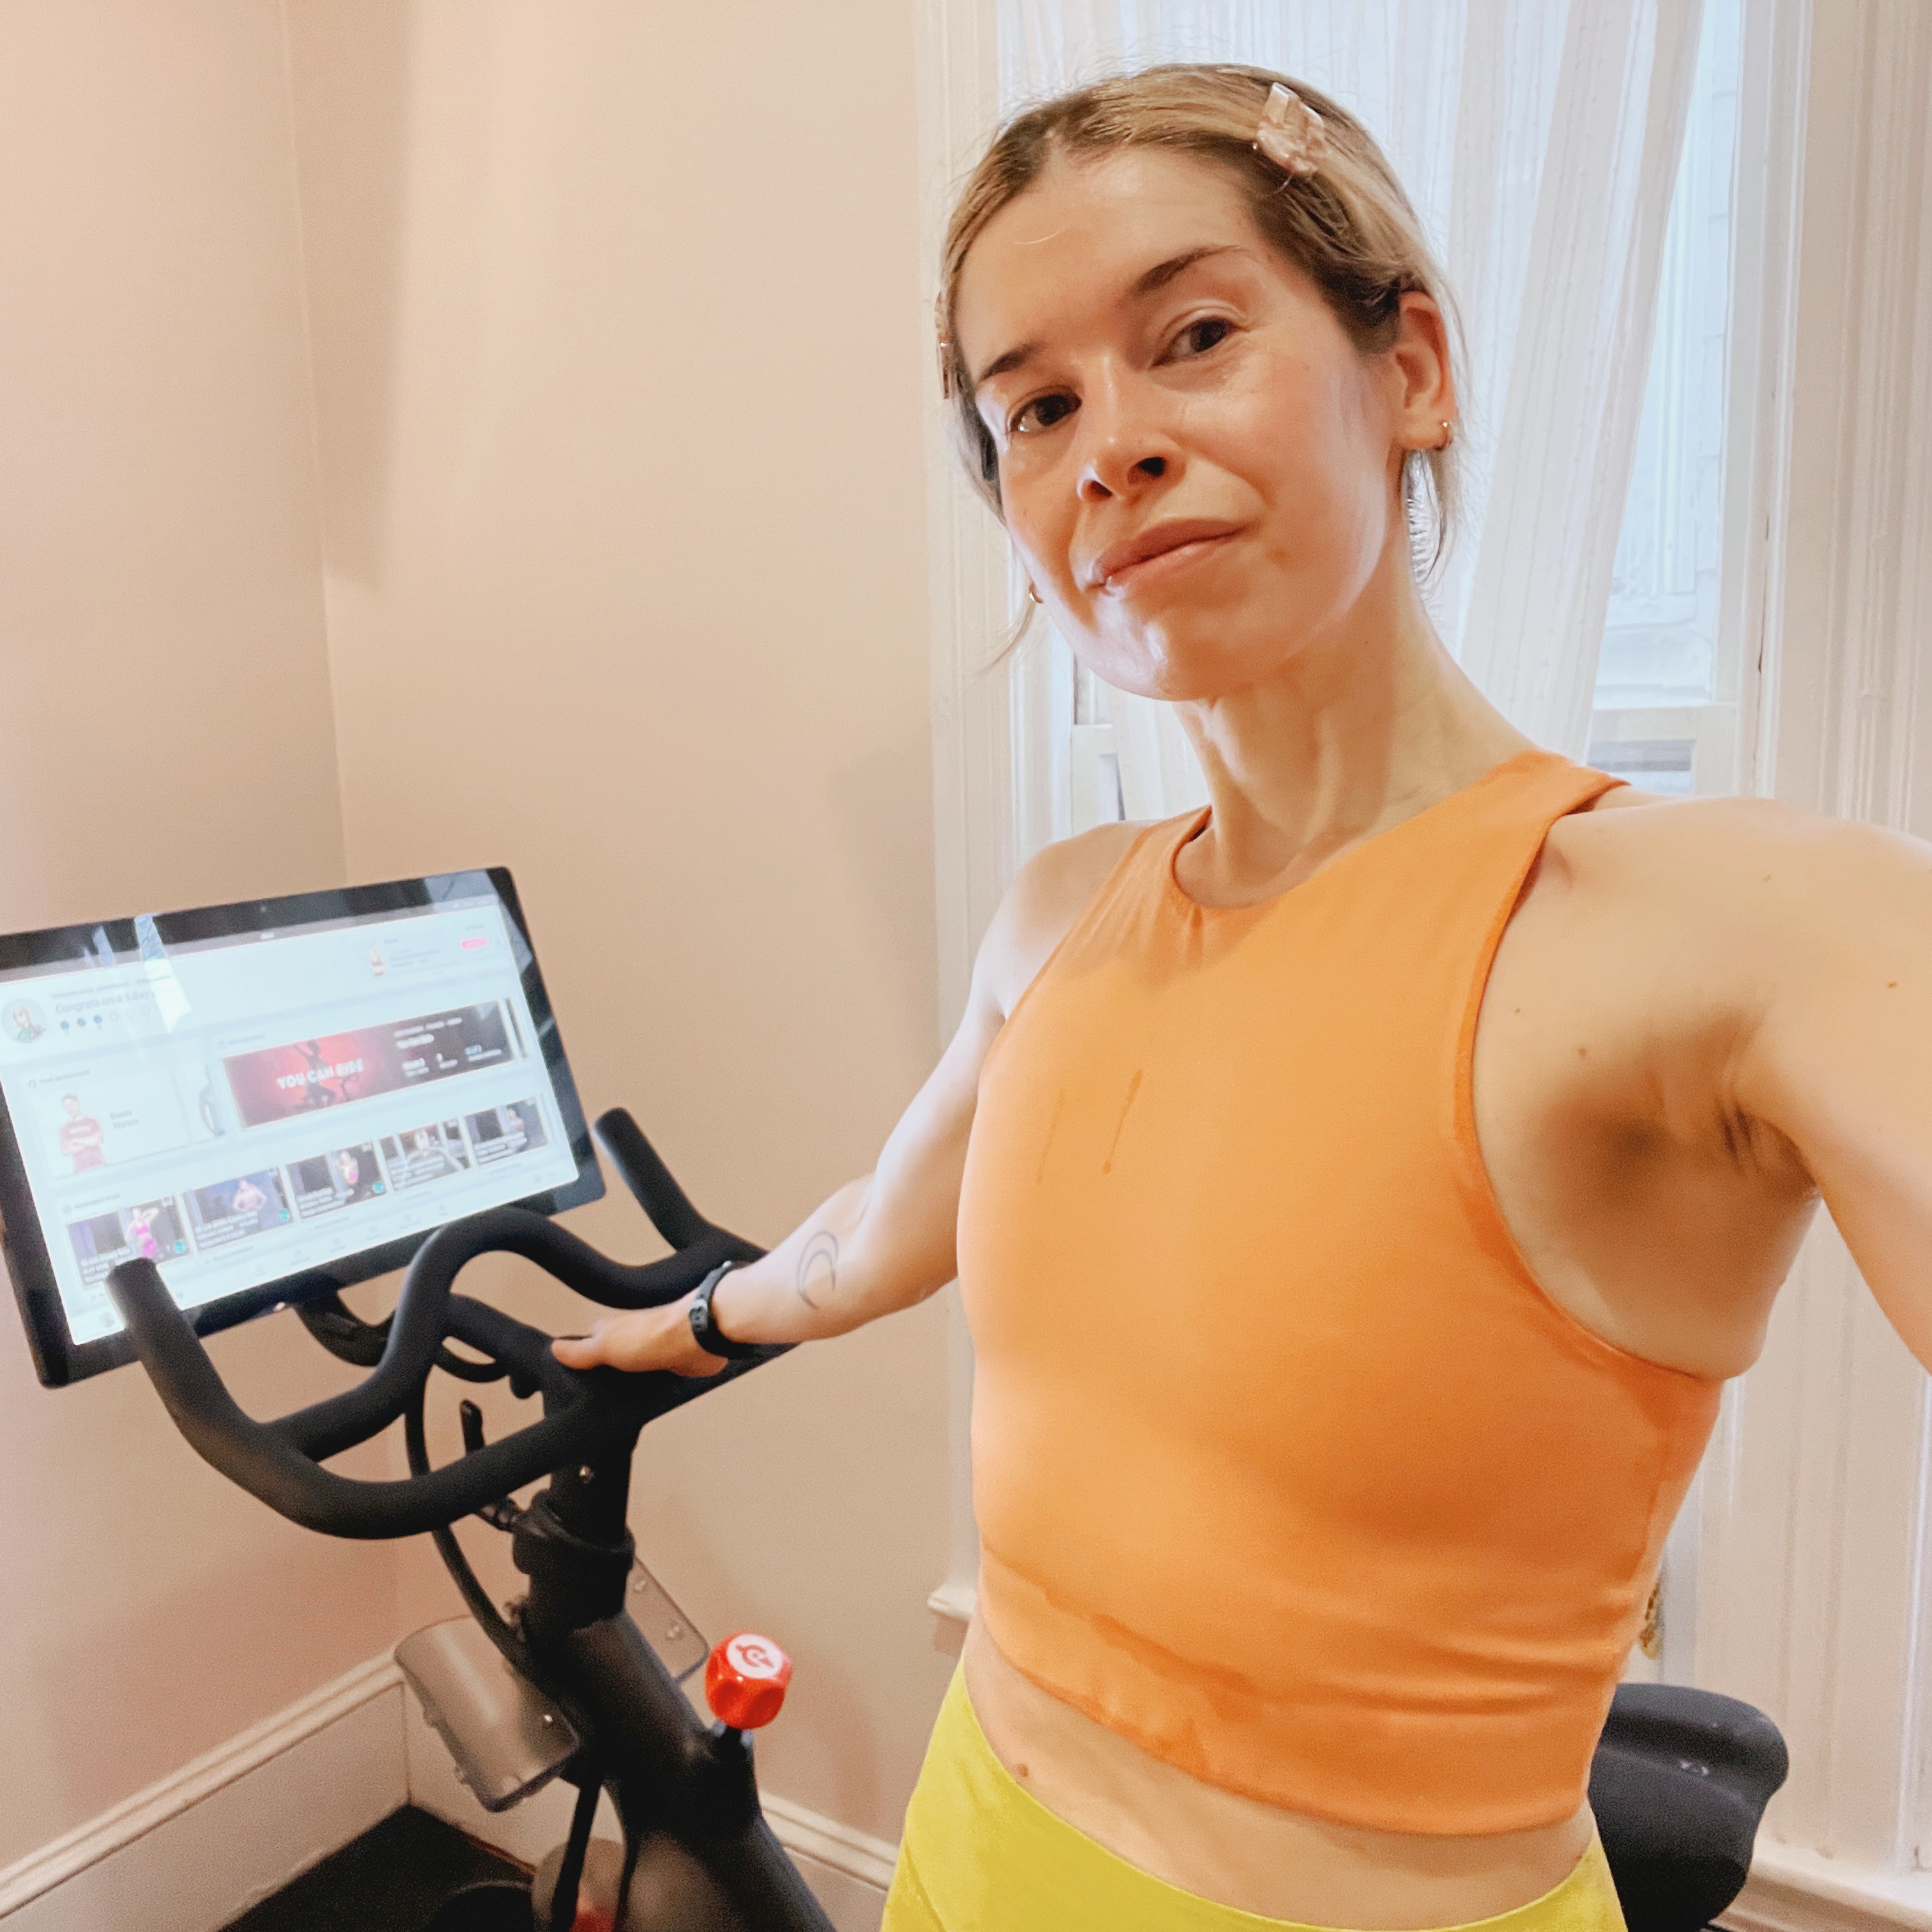 App to Bike: Why I Took The Plunge With Peloton